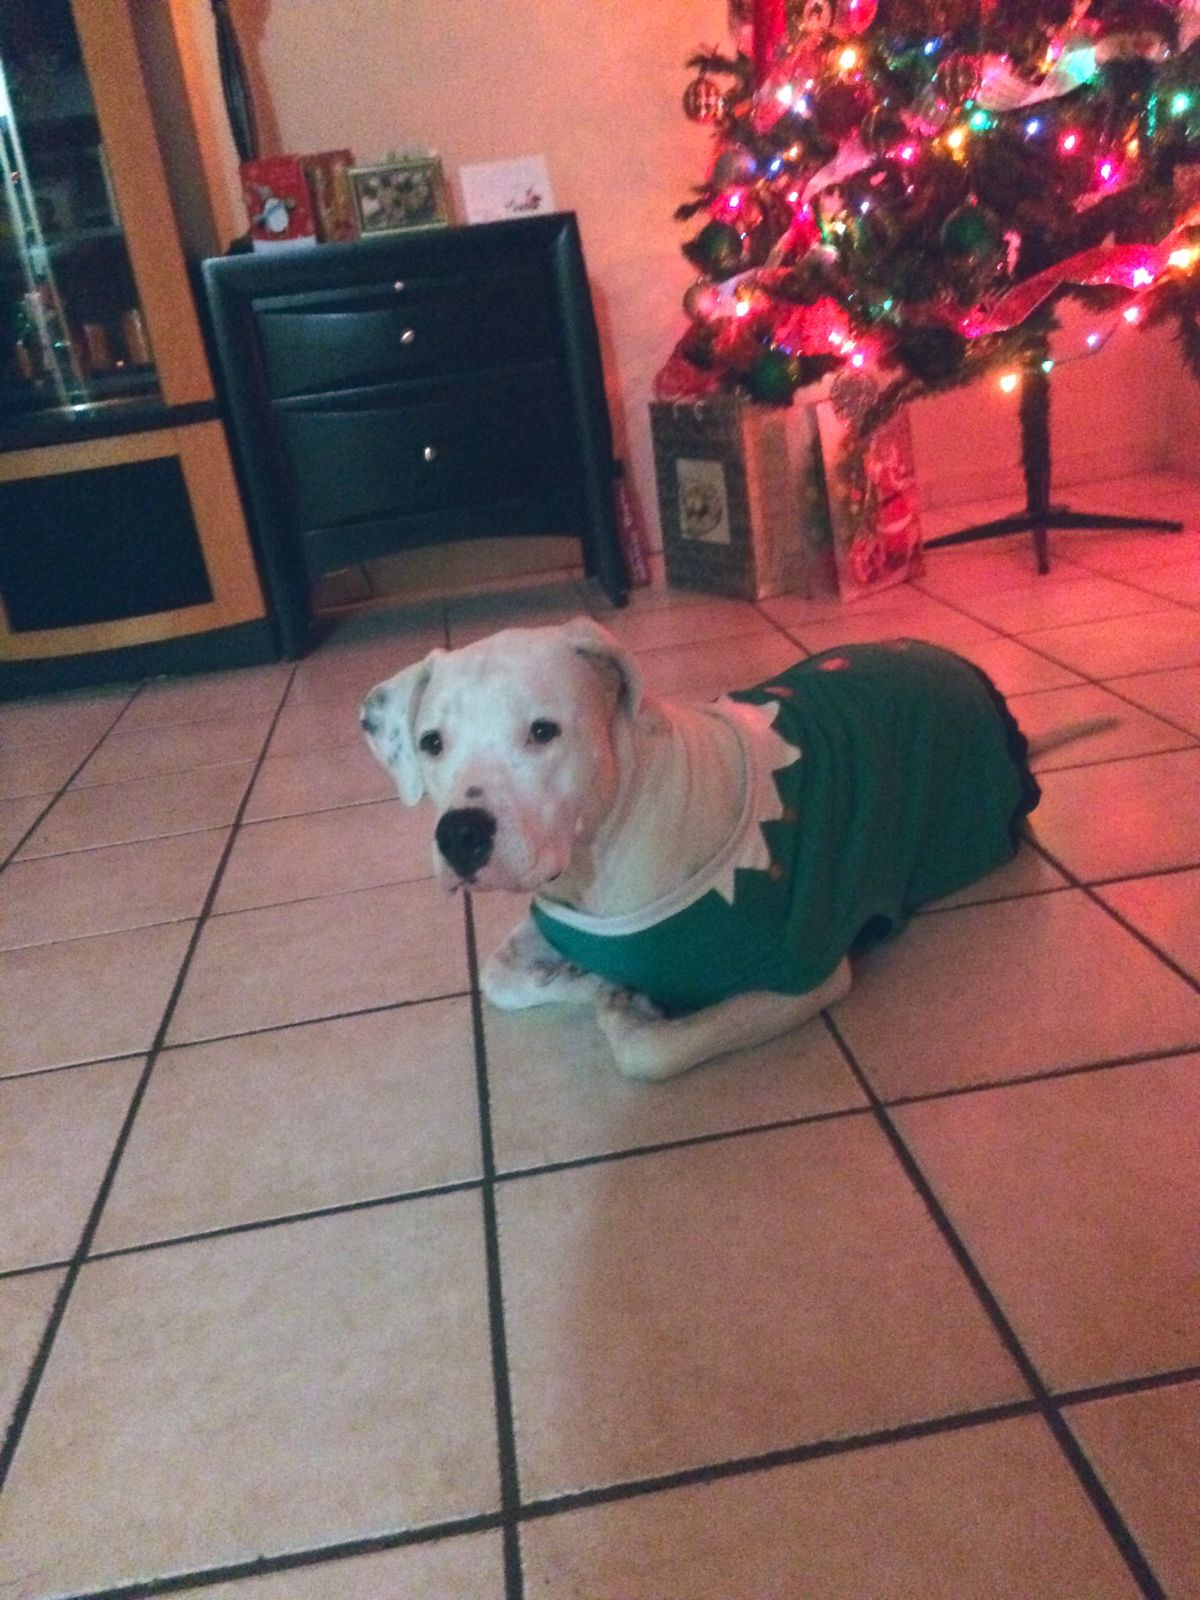 white pitbull in a green and white shirt sitting like a cat with the legs tucked in